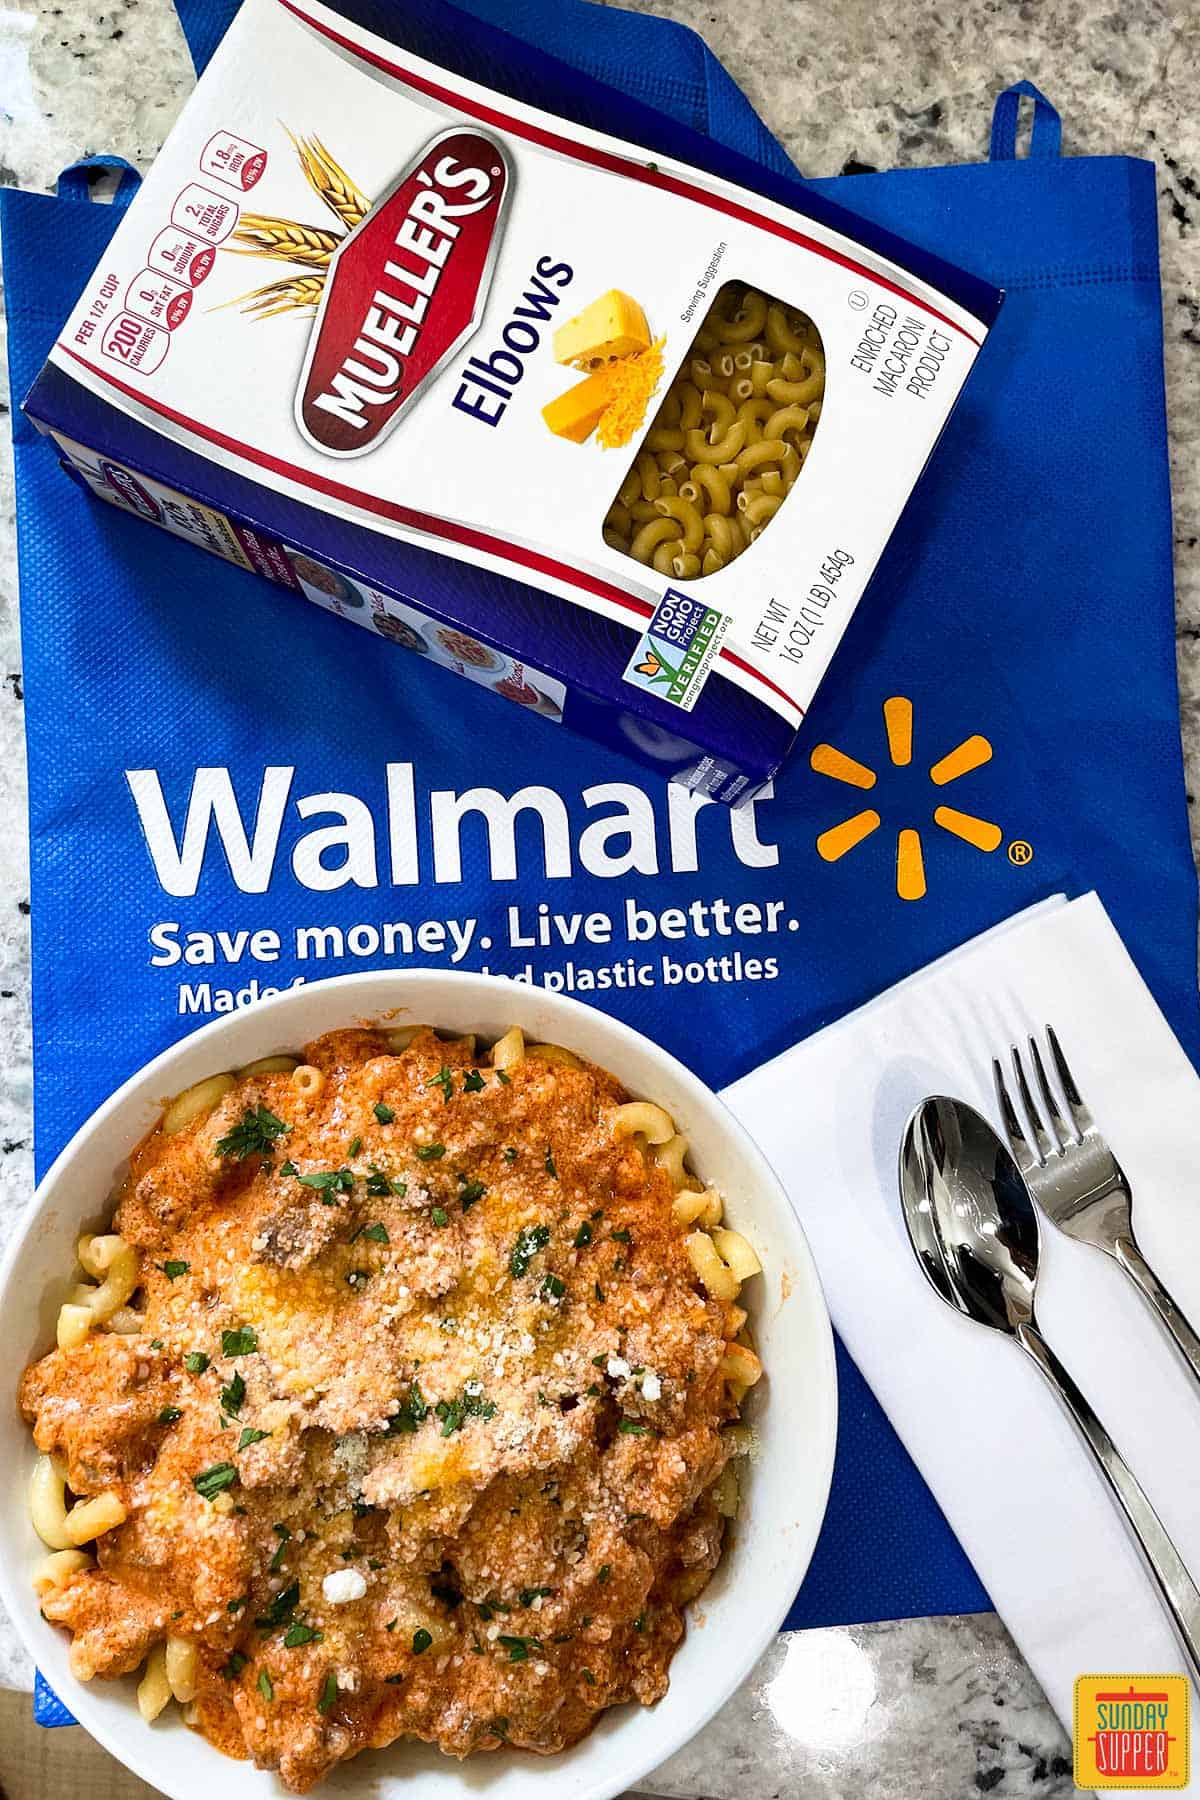 Pink pasta in a bowl with a Walmart bag and Mueller's pasta in a box